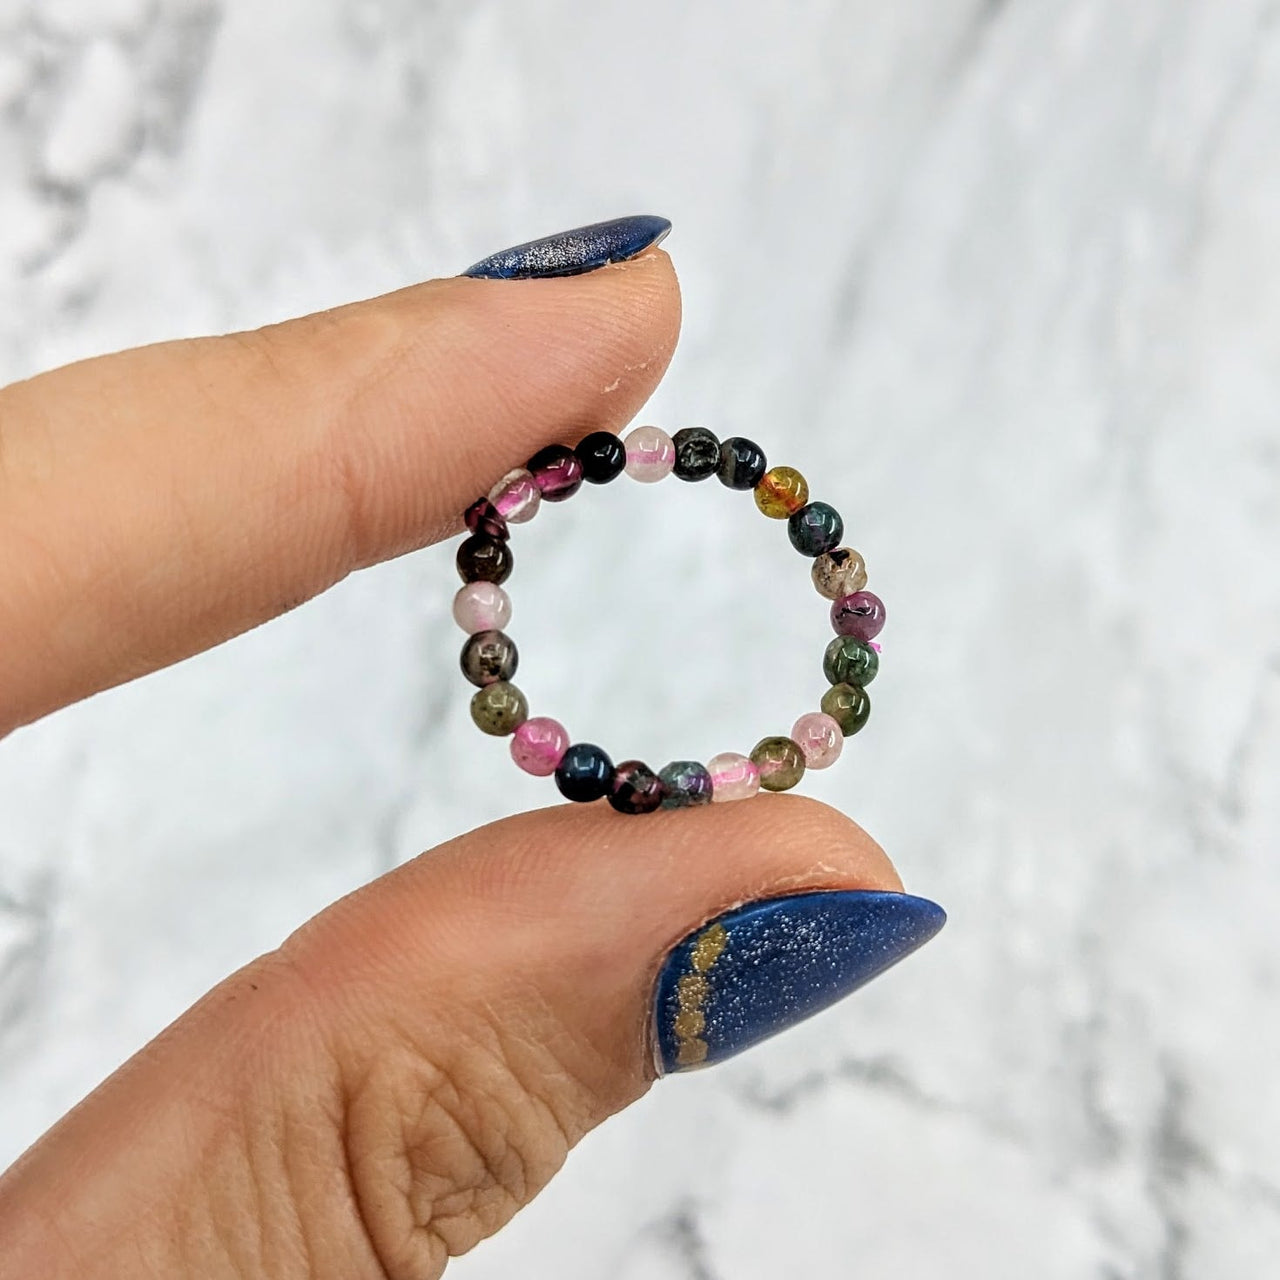 Woman’s hand holding Tourmaline Mixed 1’ Beaded Stretchy Ring #LV1970 with colorful beads